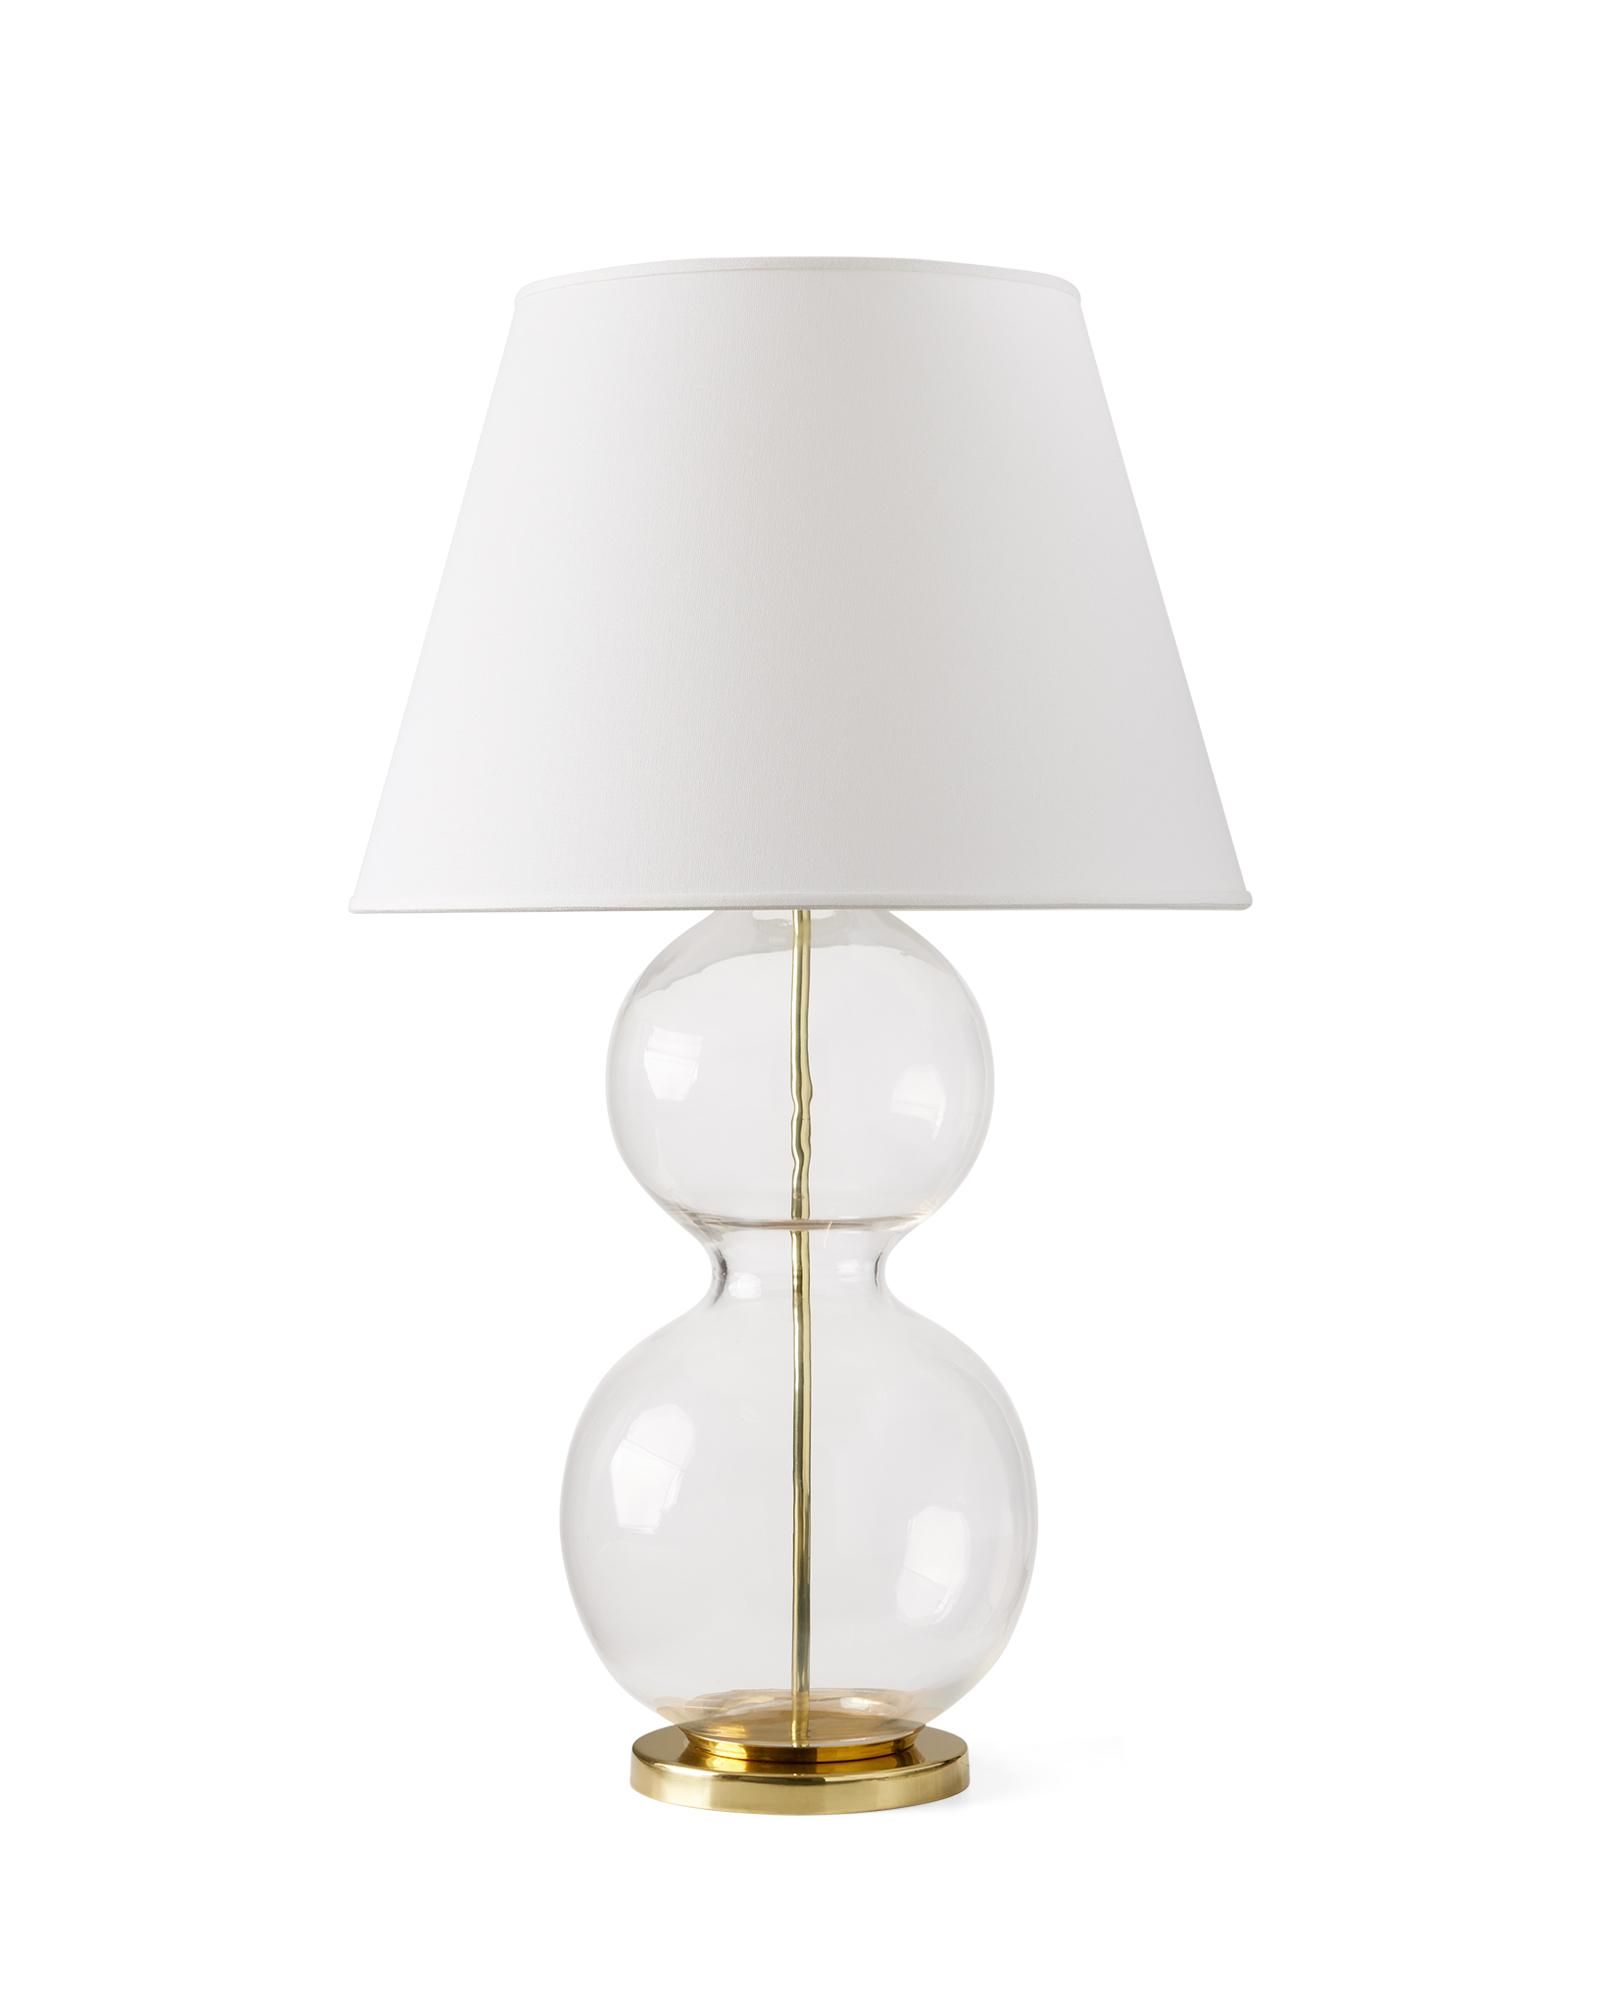 Chelsea Table Lamp | Serena and Lily